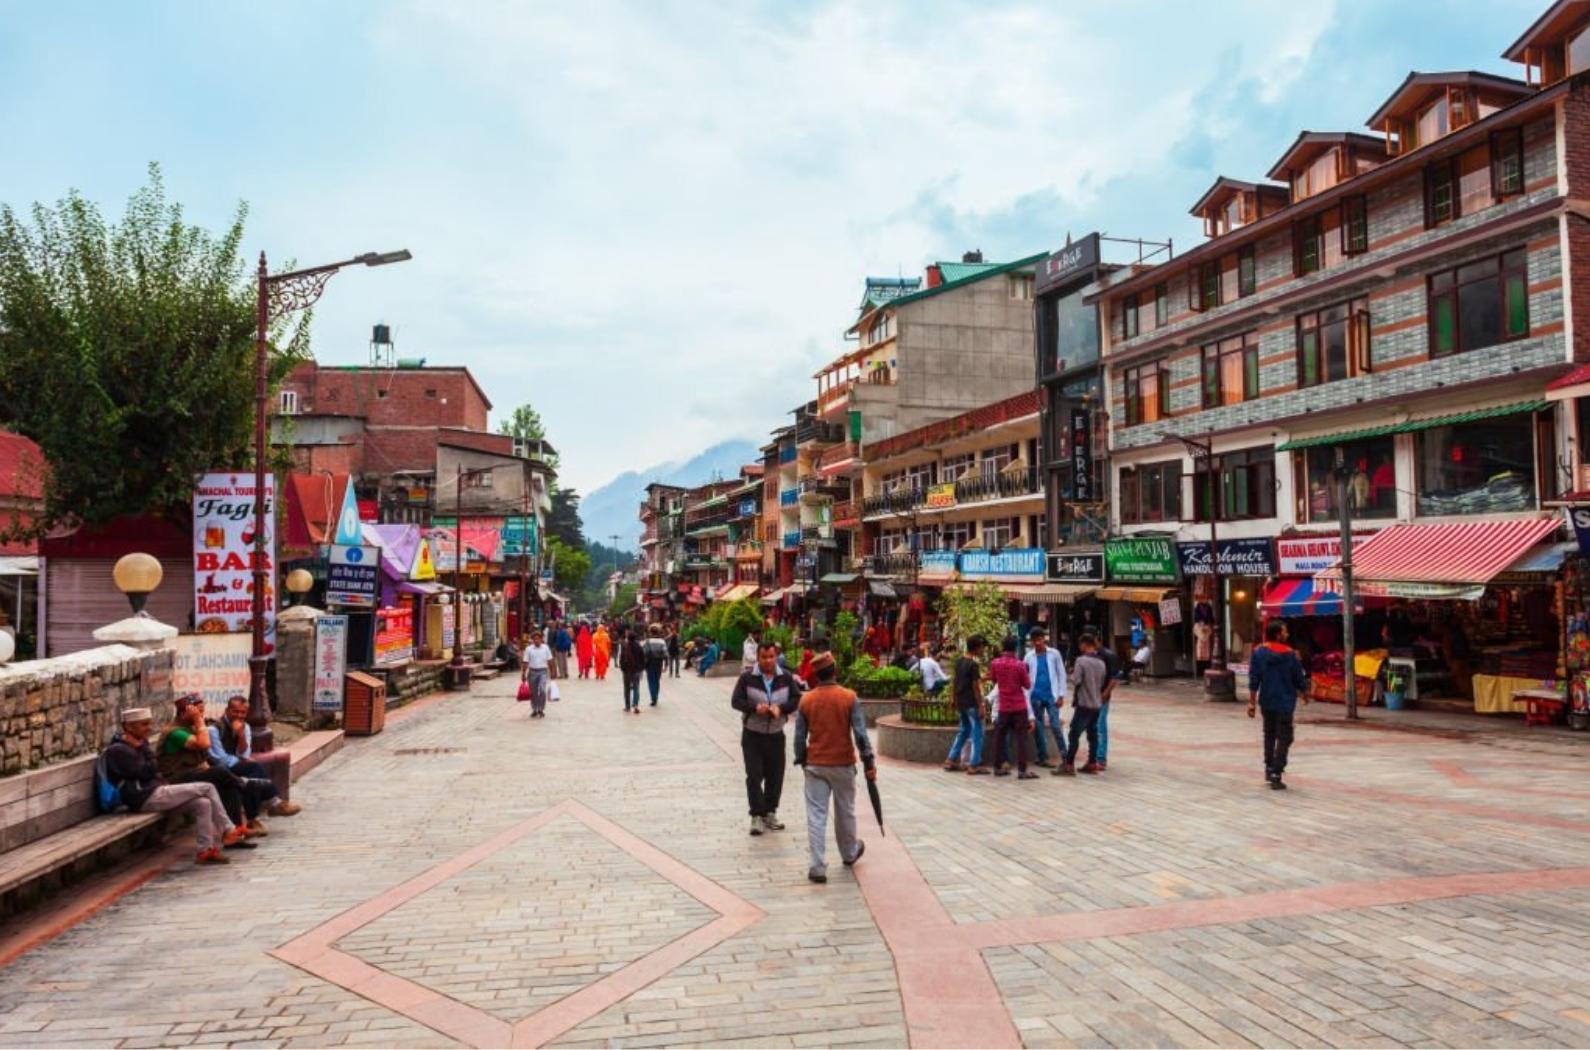 The Mall Road is a main pedestrian street in Shimla town.